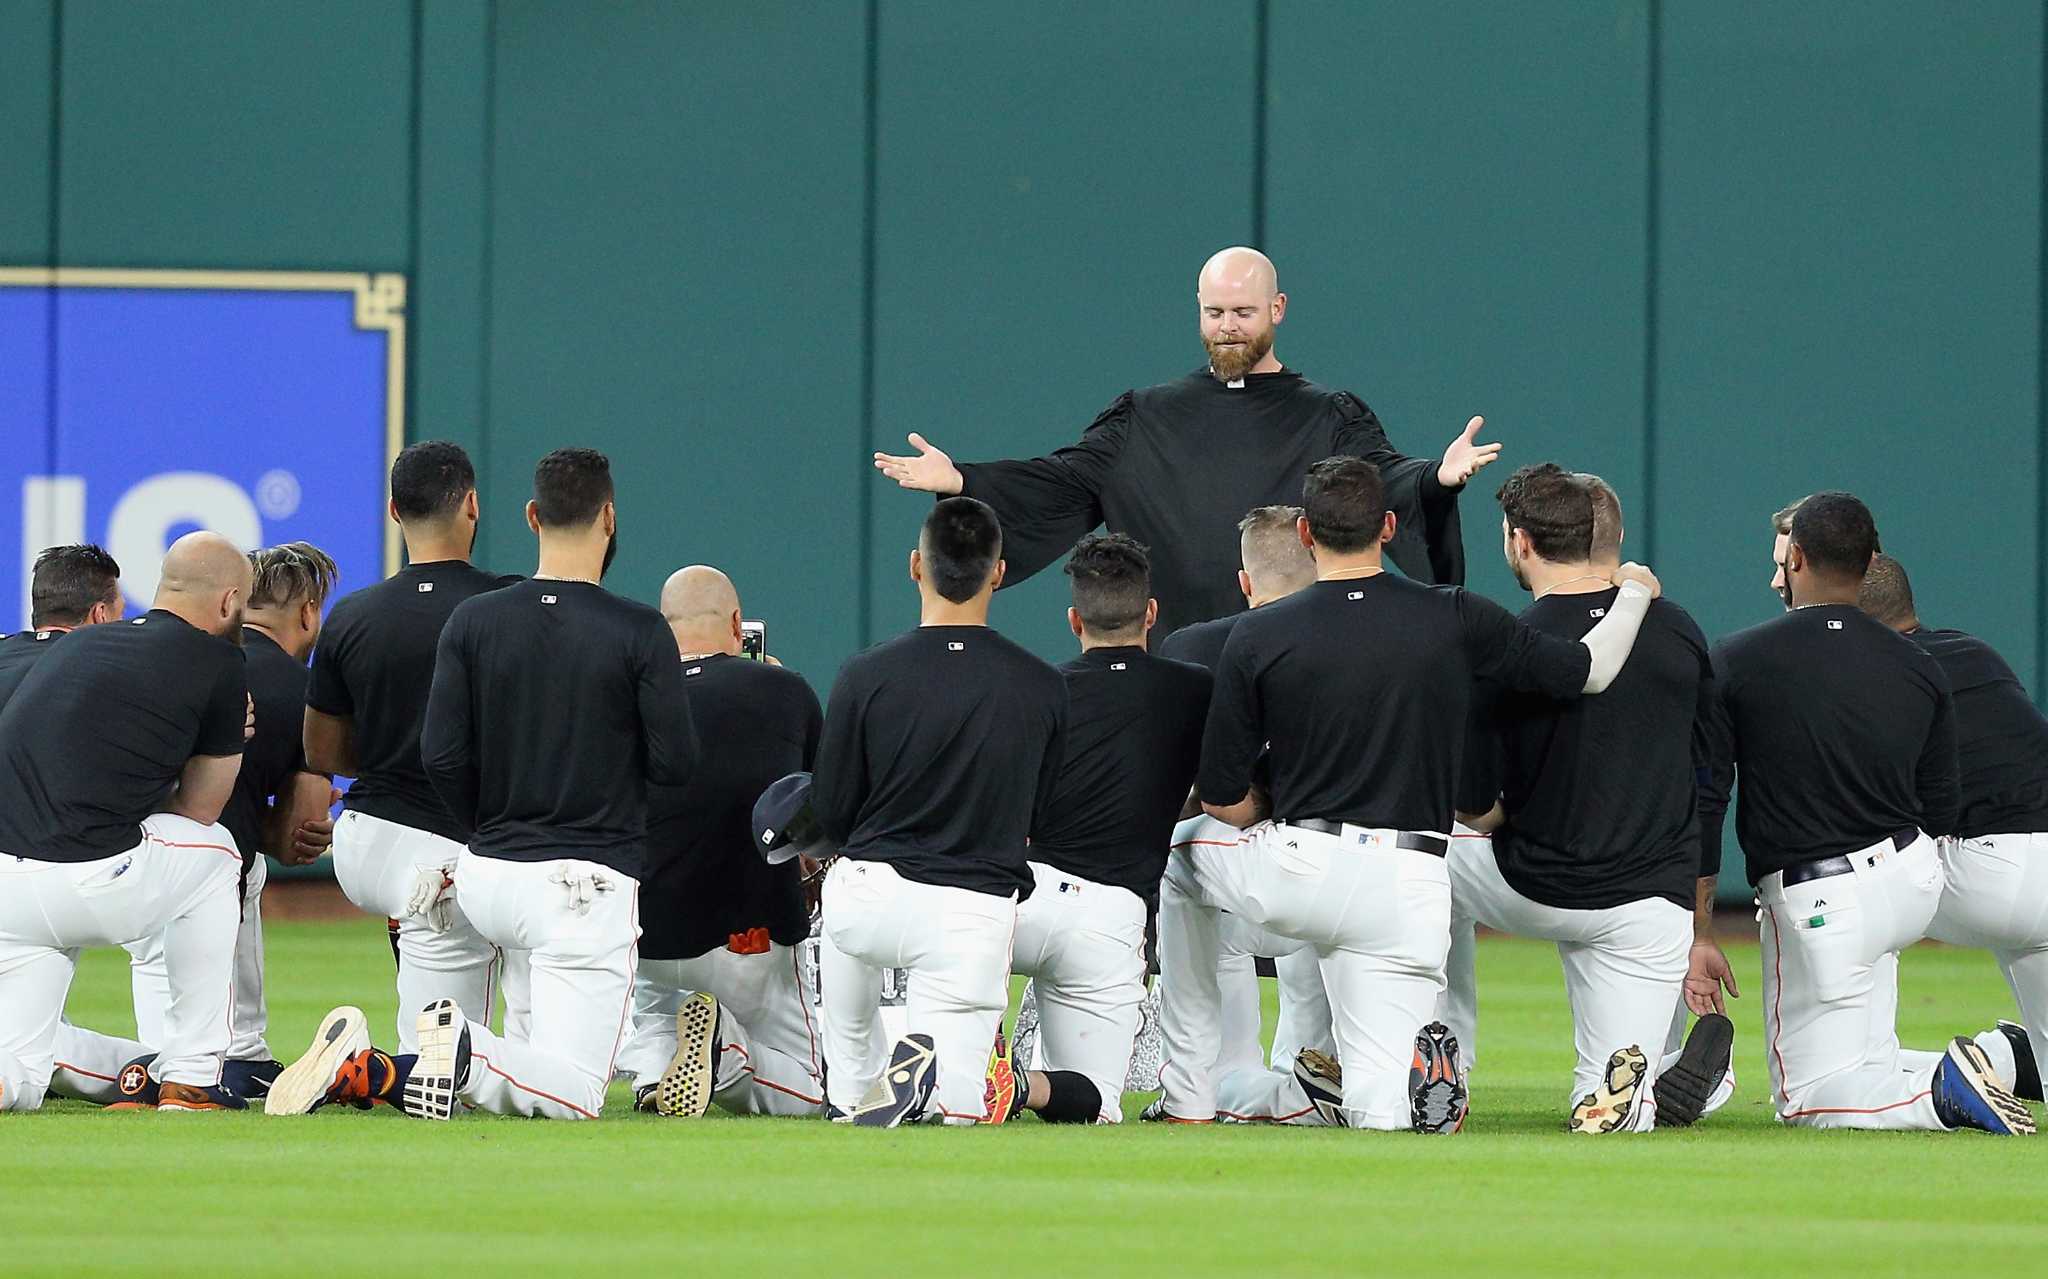 Astros hold funeral for Carlos Beltran's outfield glove